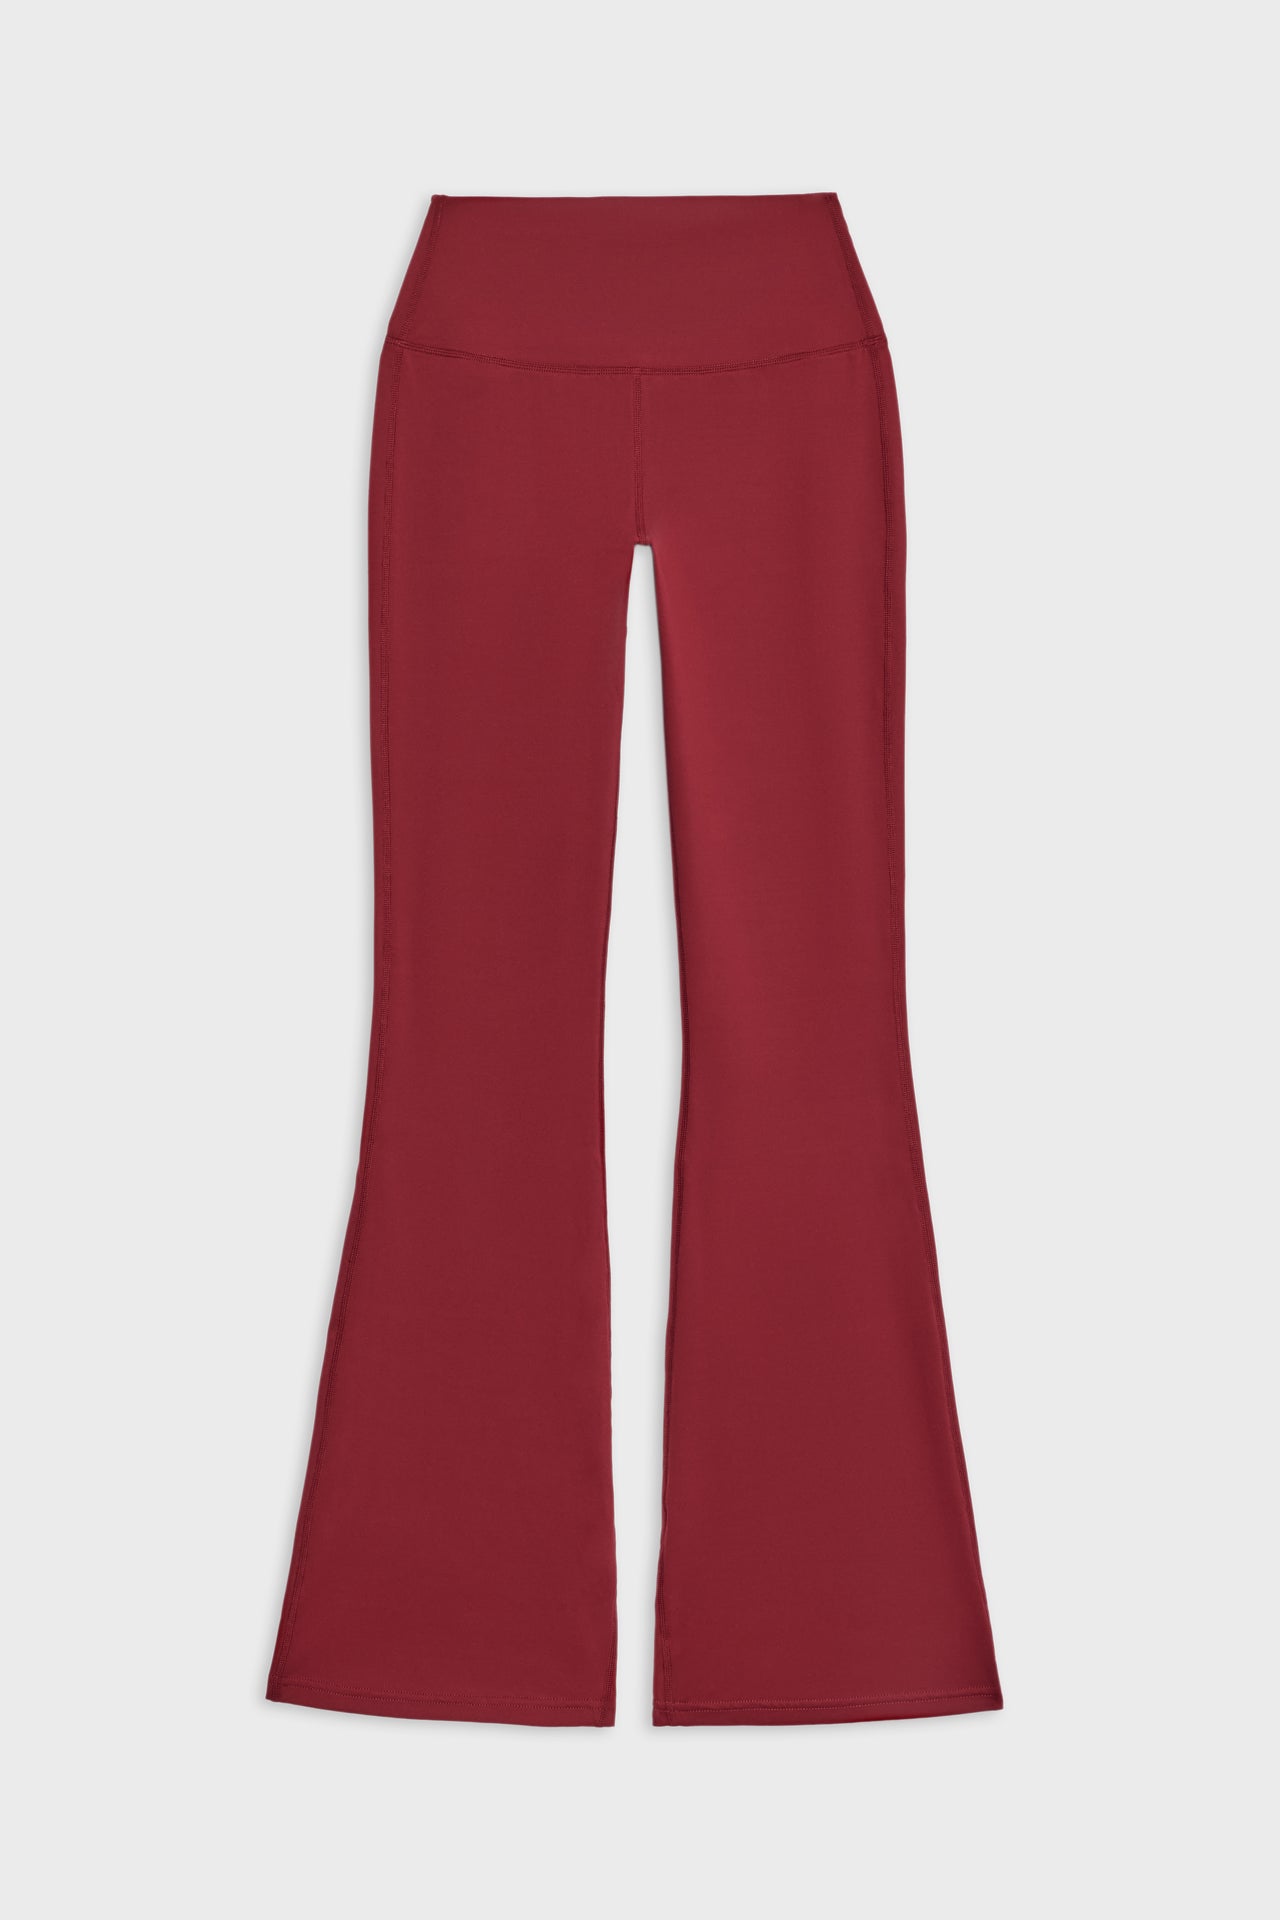 Front flat view of dark red high waist below ankle length legging with wide flared bottoms